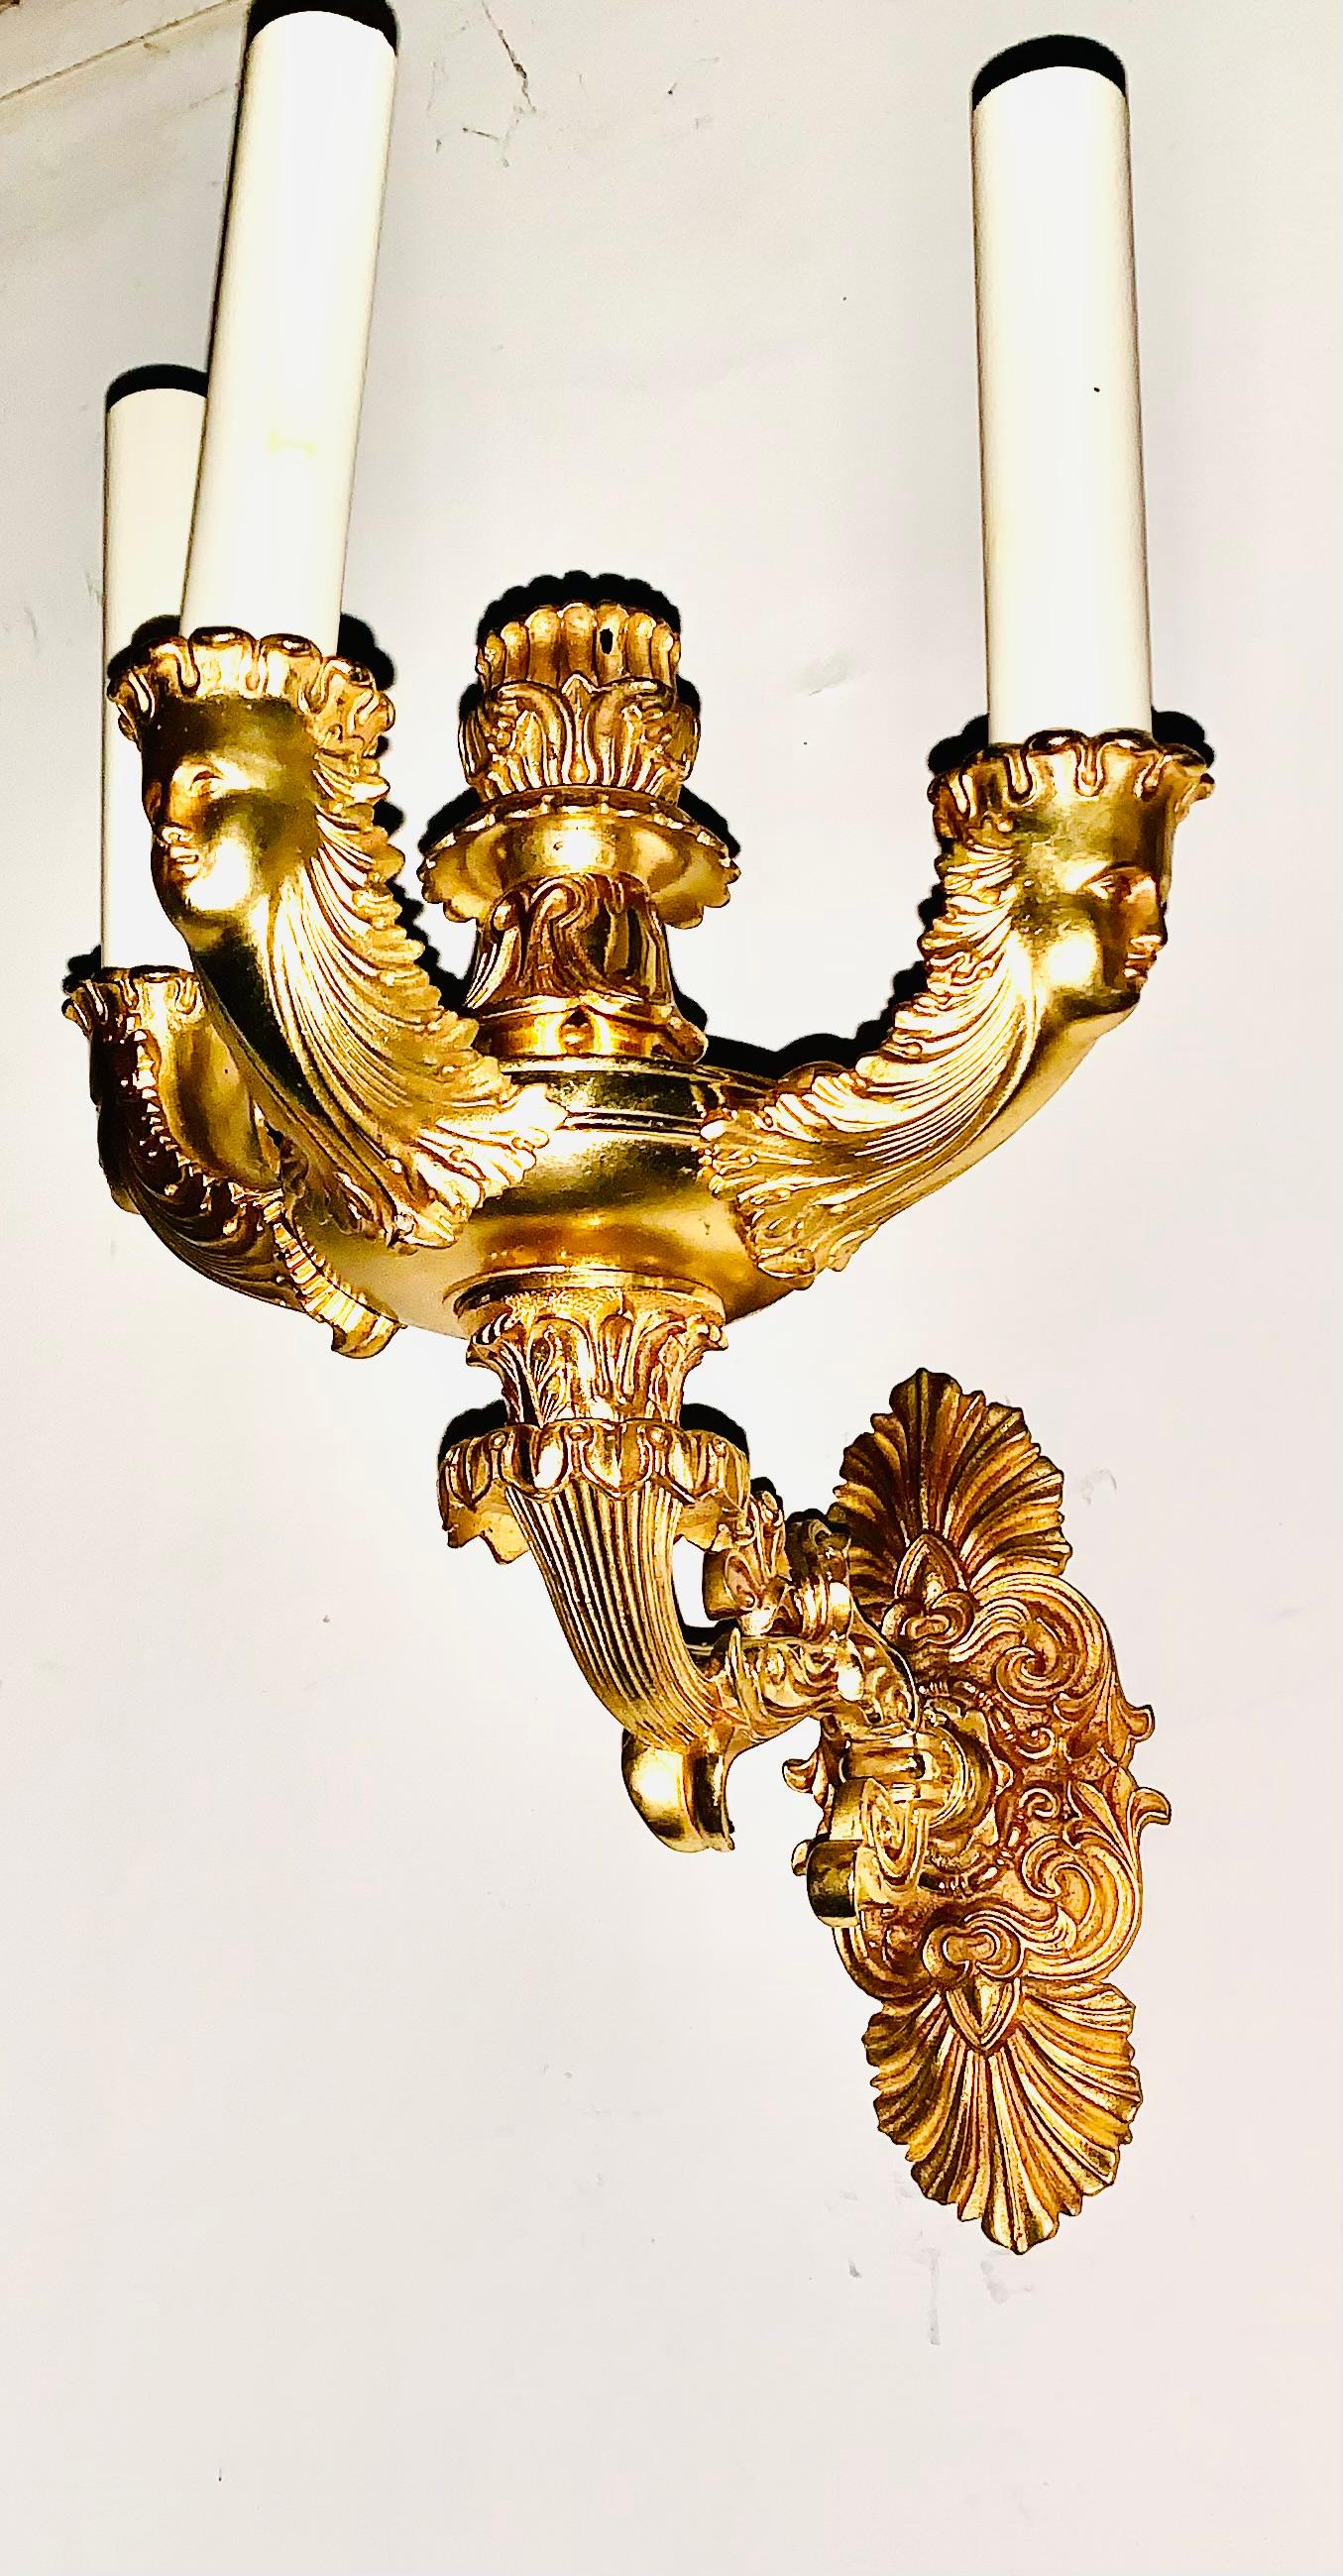 Superb pair of antique French Empire period gilt bronze figural three light sconces
Circa 1830
Striking figural sconces originally created for use with oil, now electified. This beautifully balanced style is perfect for elevating and adding interest